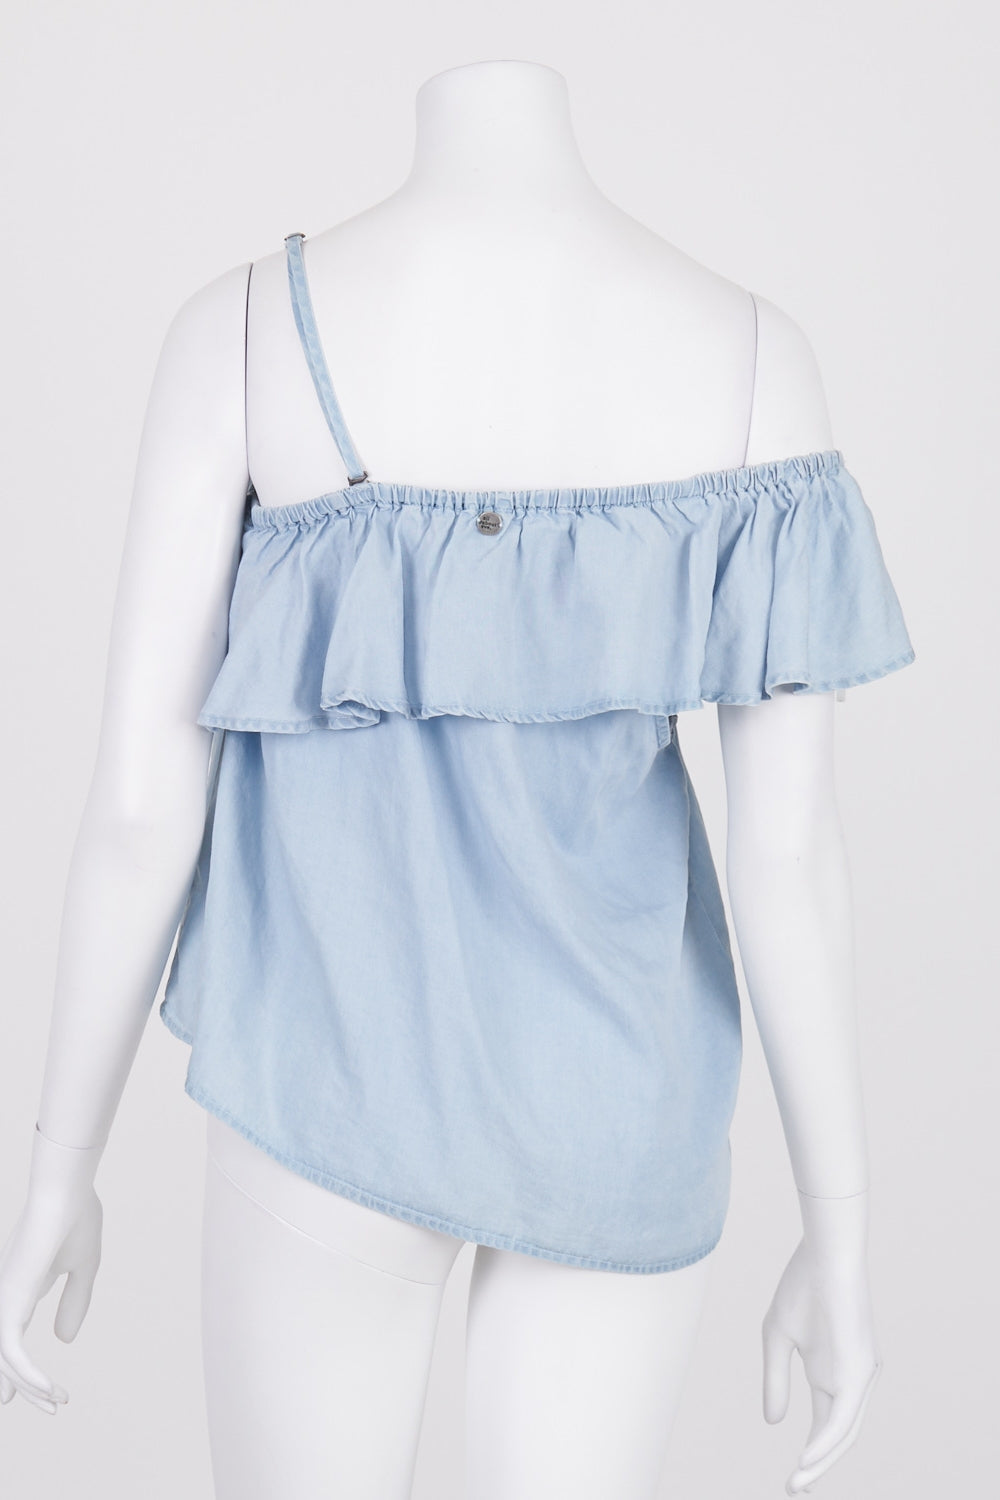 All About Eve Blue Boho Top 14